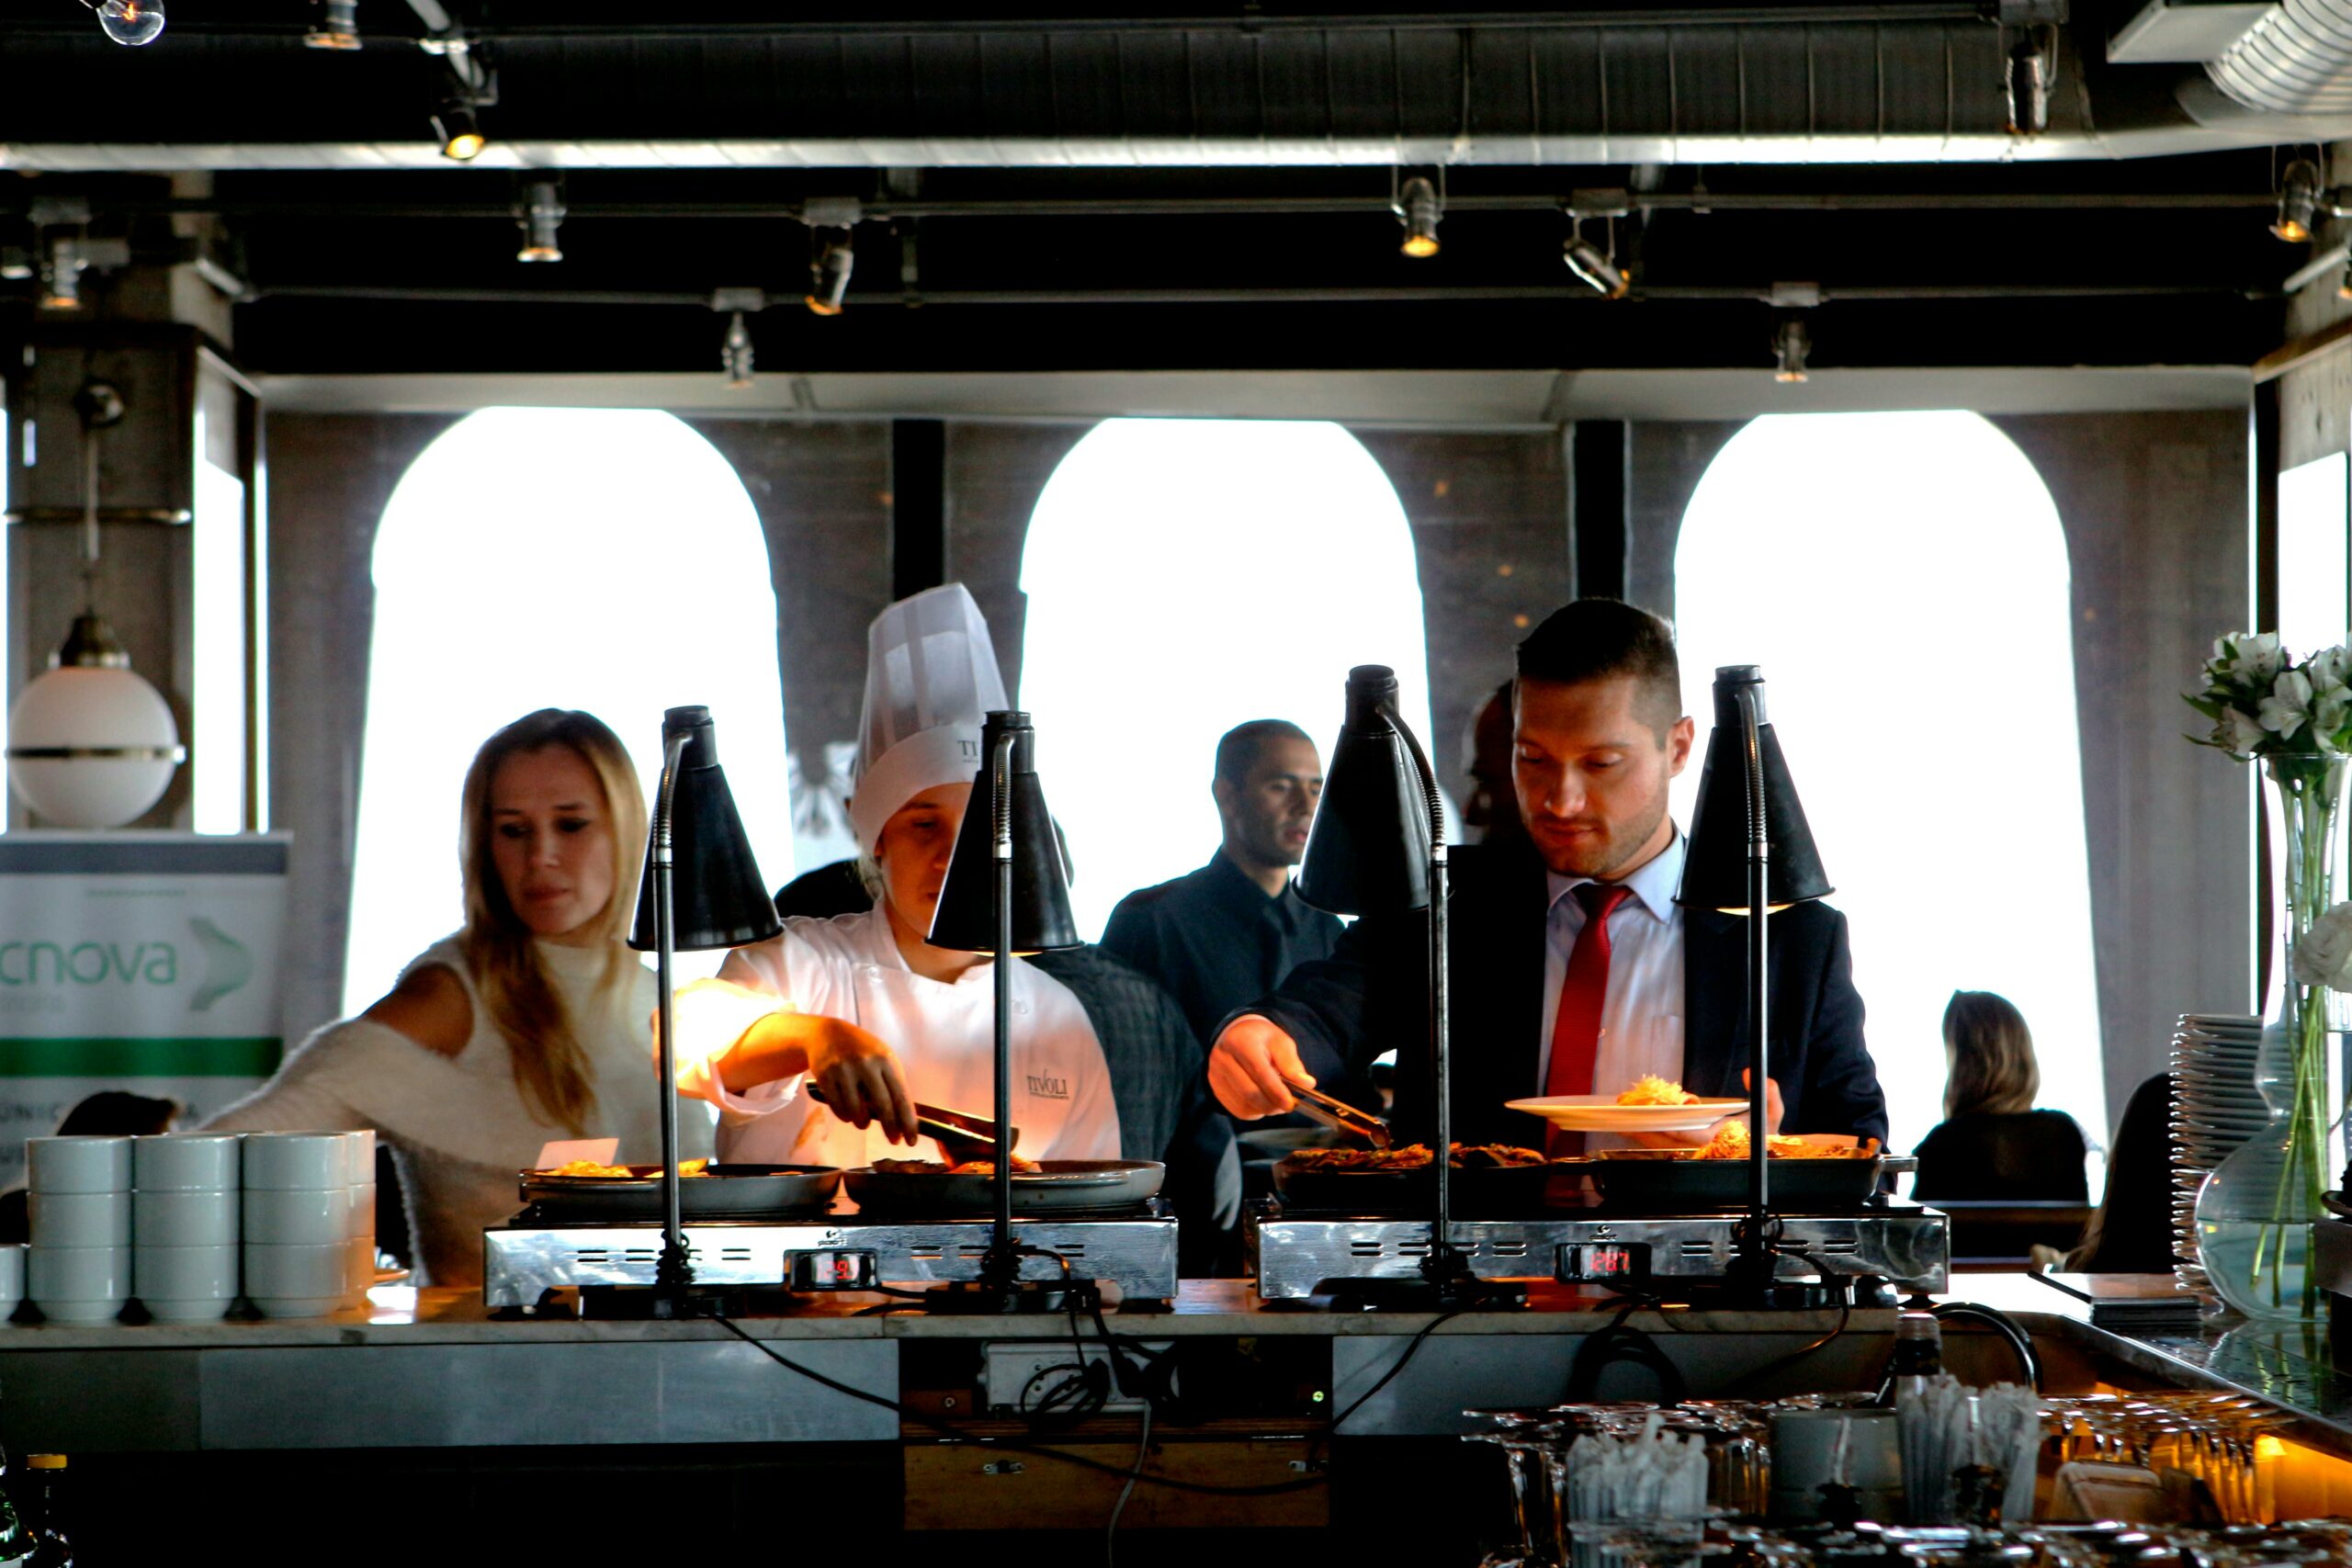 People serving food at a buffet in a restaurant. A chef in a white uniform and hat is preparing dishes, while a man in a suit and a woman in casual attire select their meals under warm lights.